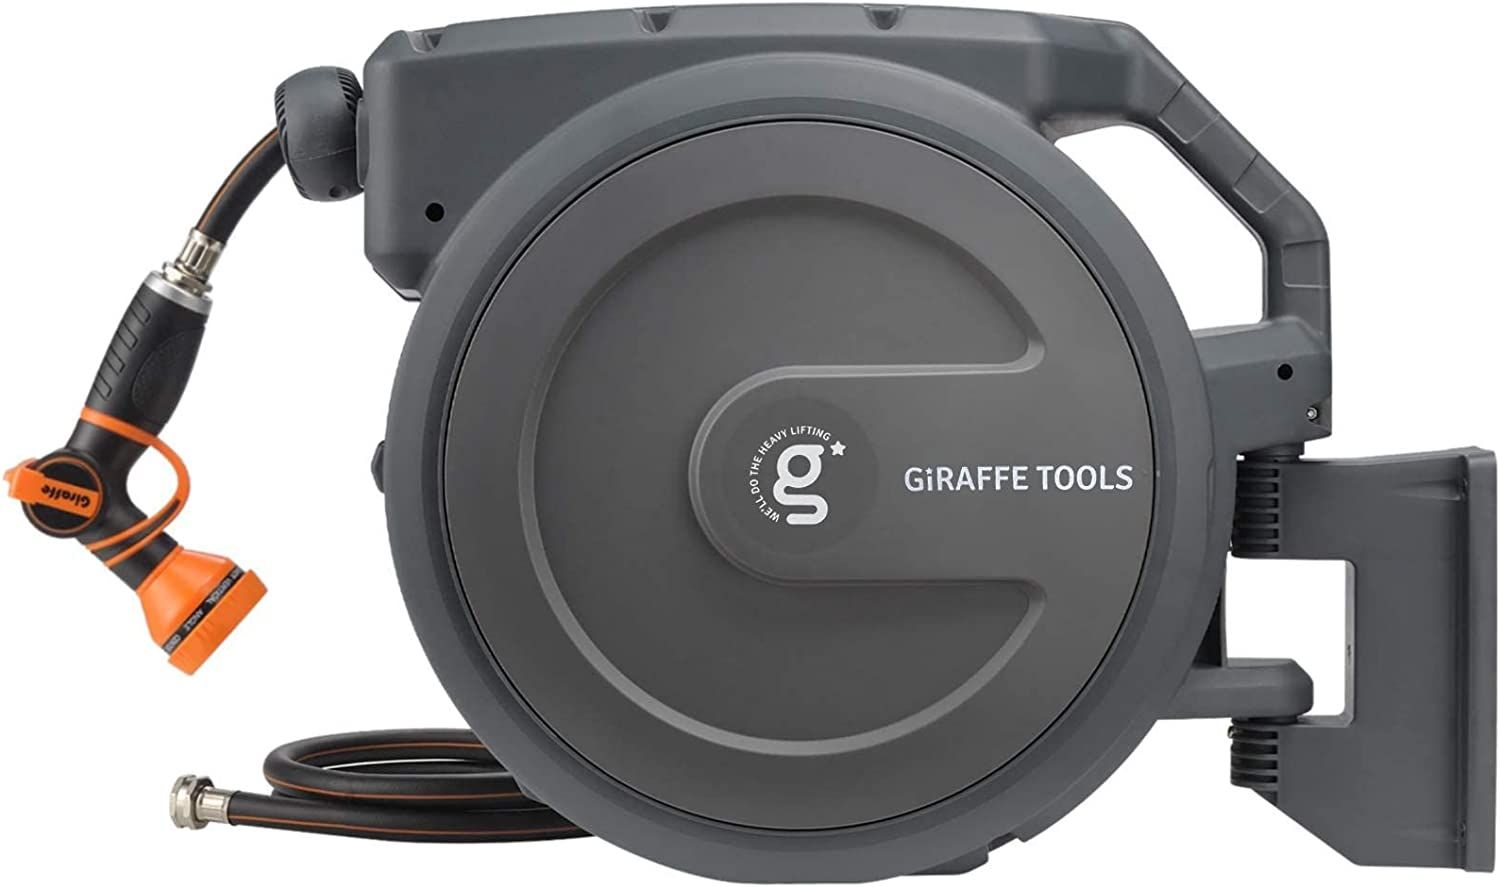 Giraffe Tools AW30 Garden Hose Reel Retractable 1/2" x 100 ft Wall Mounted Water Hose Reel Automatic | Amazon (US)